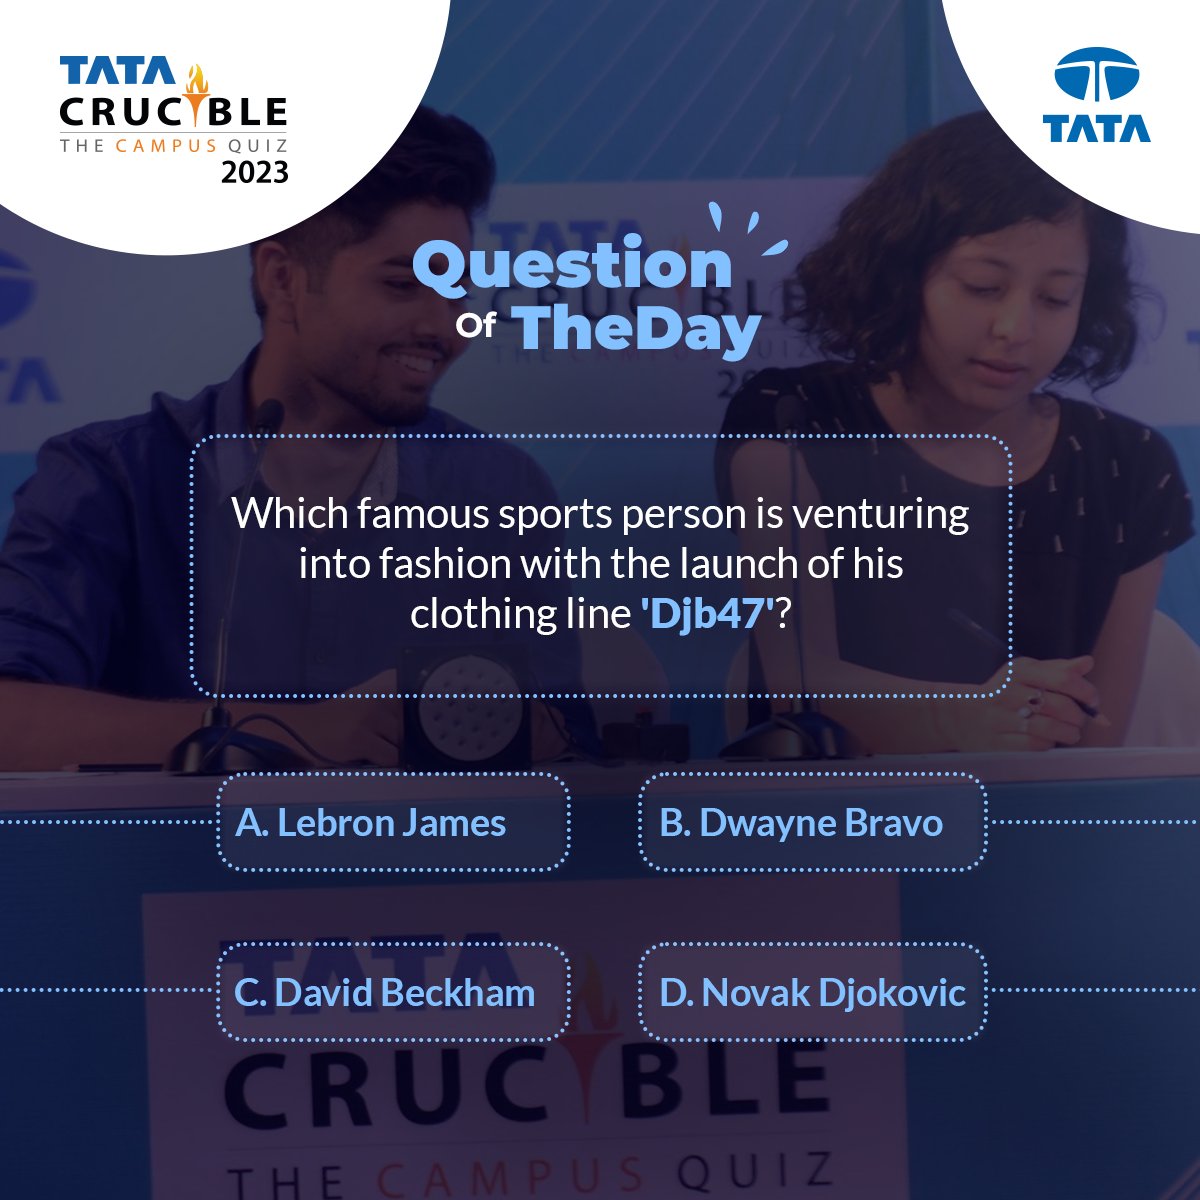 Are you up for the challenge? Then answer the #QuestionOfTheDay.

Identify the sports superstar turning heads in fashion with the launch of the 'Djb47' clothing line.

Comment below with your answer! 👇

#TataCrucible #QuizTime #KnowledgeChallenge #Quizzing